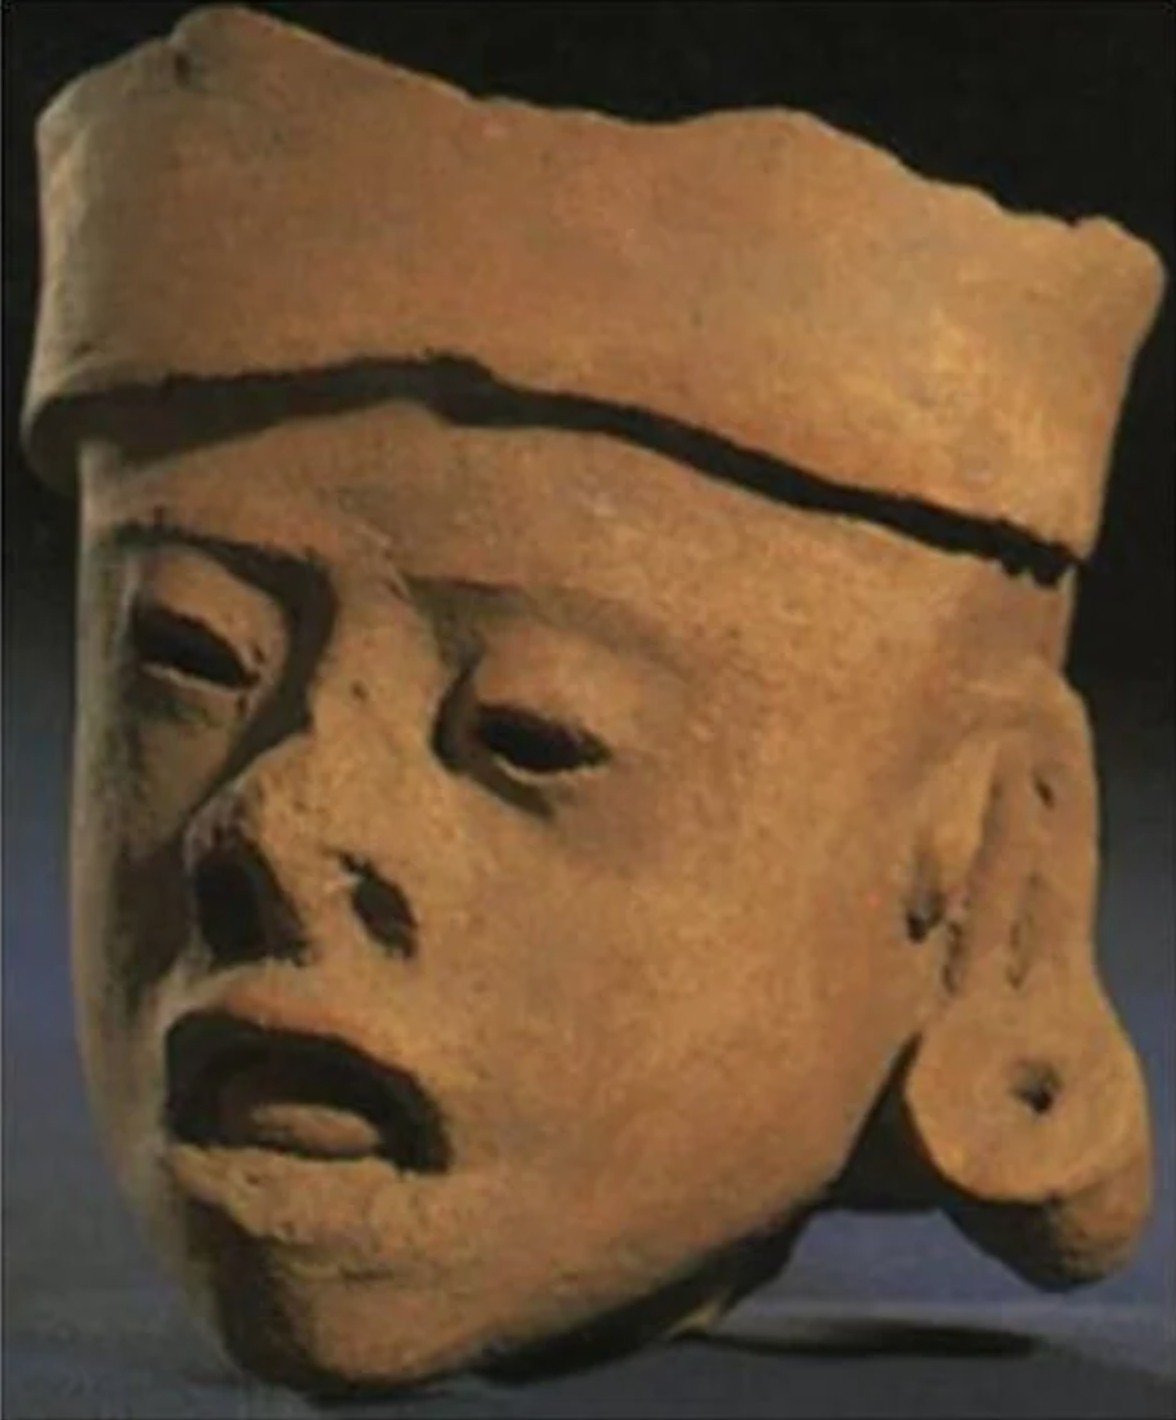 fascinating artifacts - A head fragment from a Toltec statue depicting a man with Down syndrome. (500 AD)